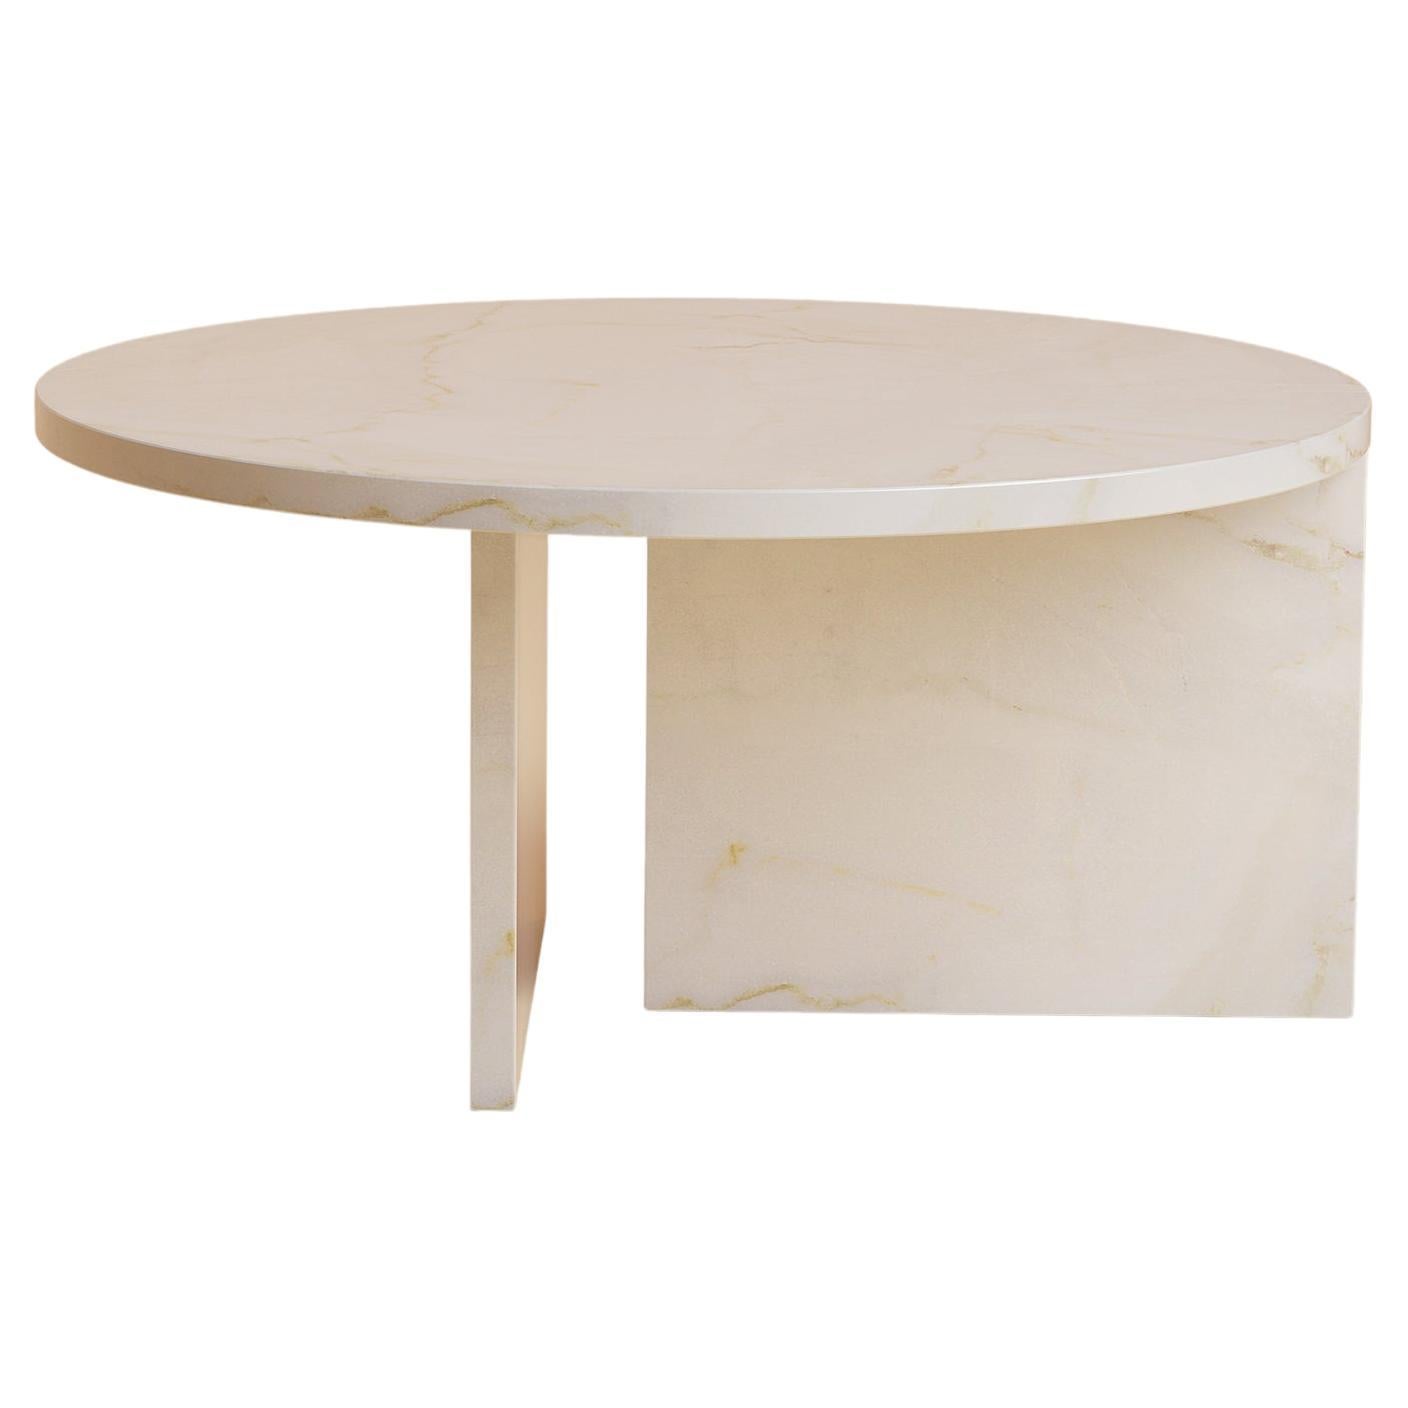 Calacatta Gold Marble Round Coffee Table, Made in Italy